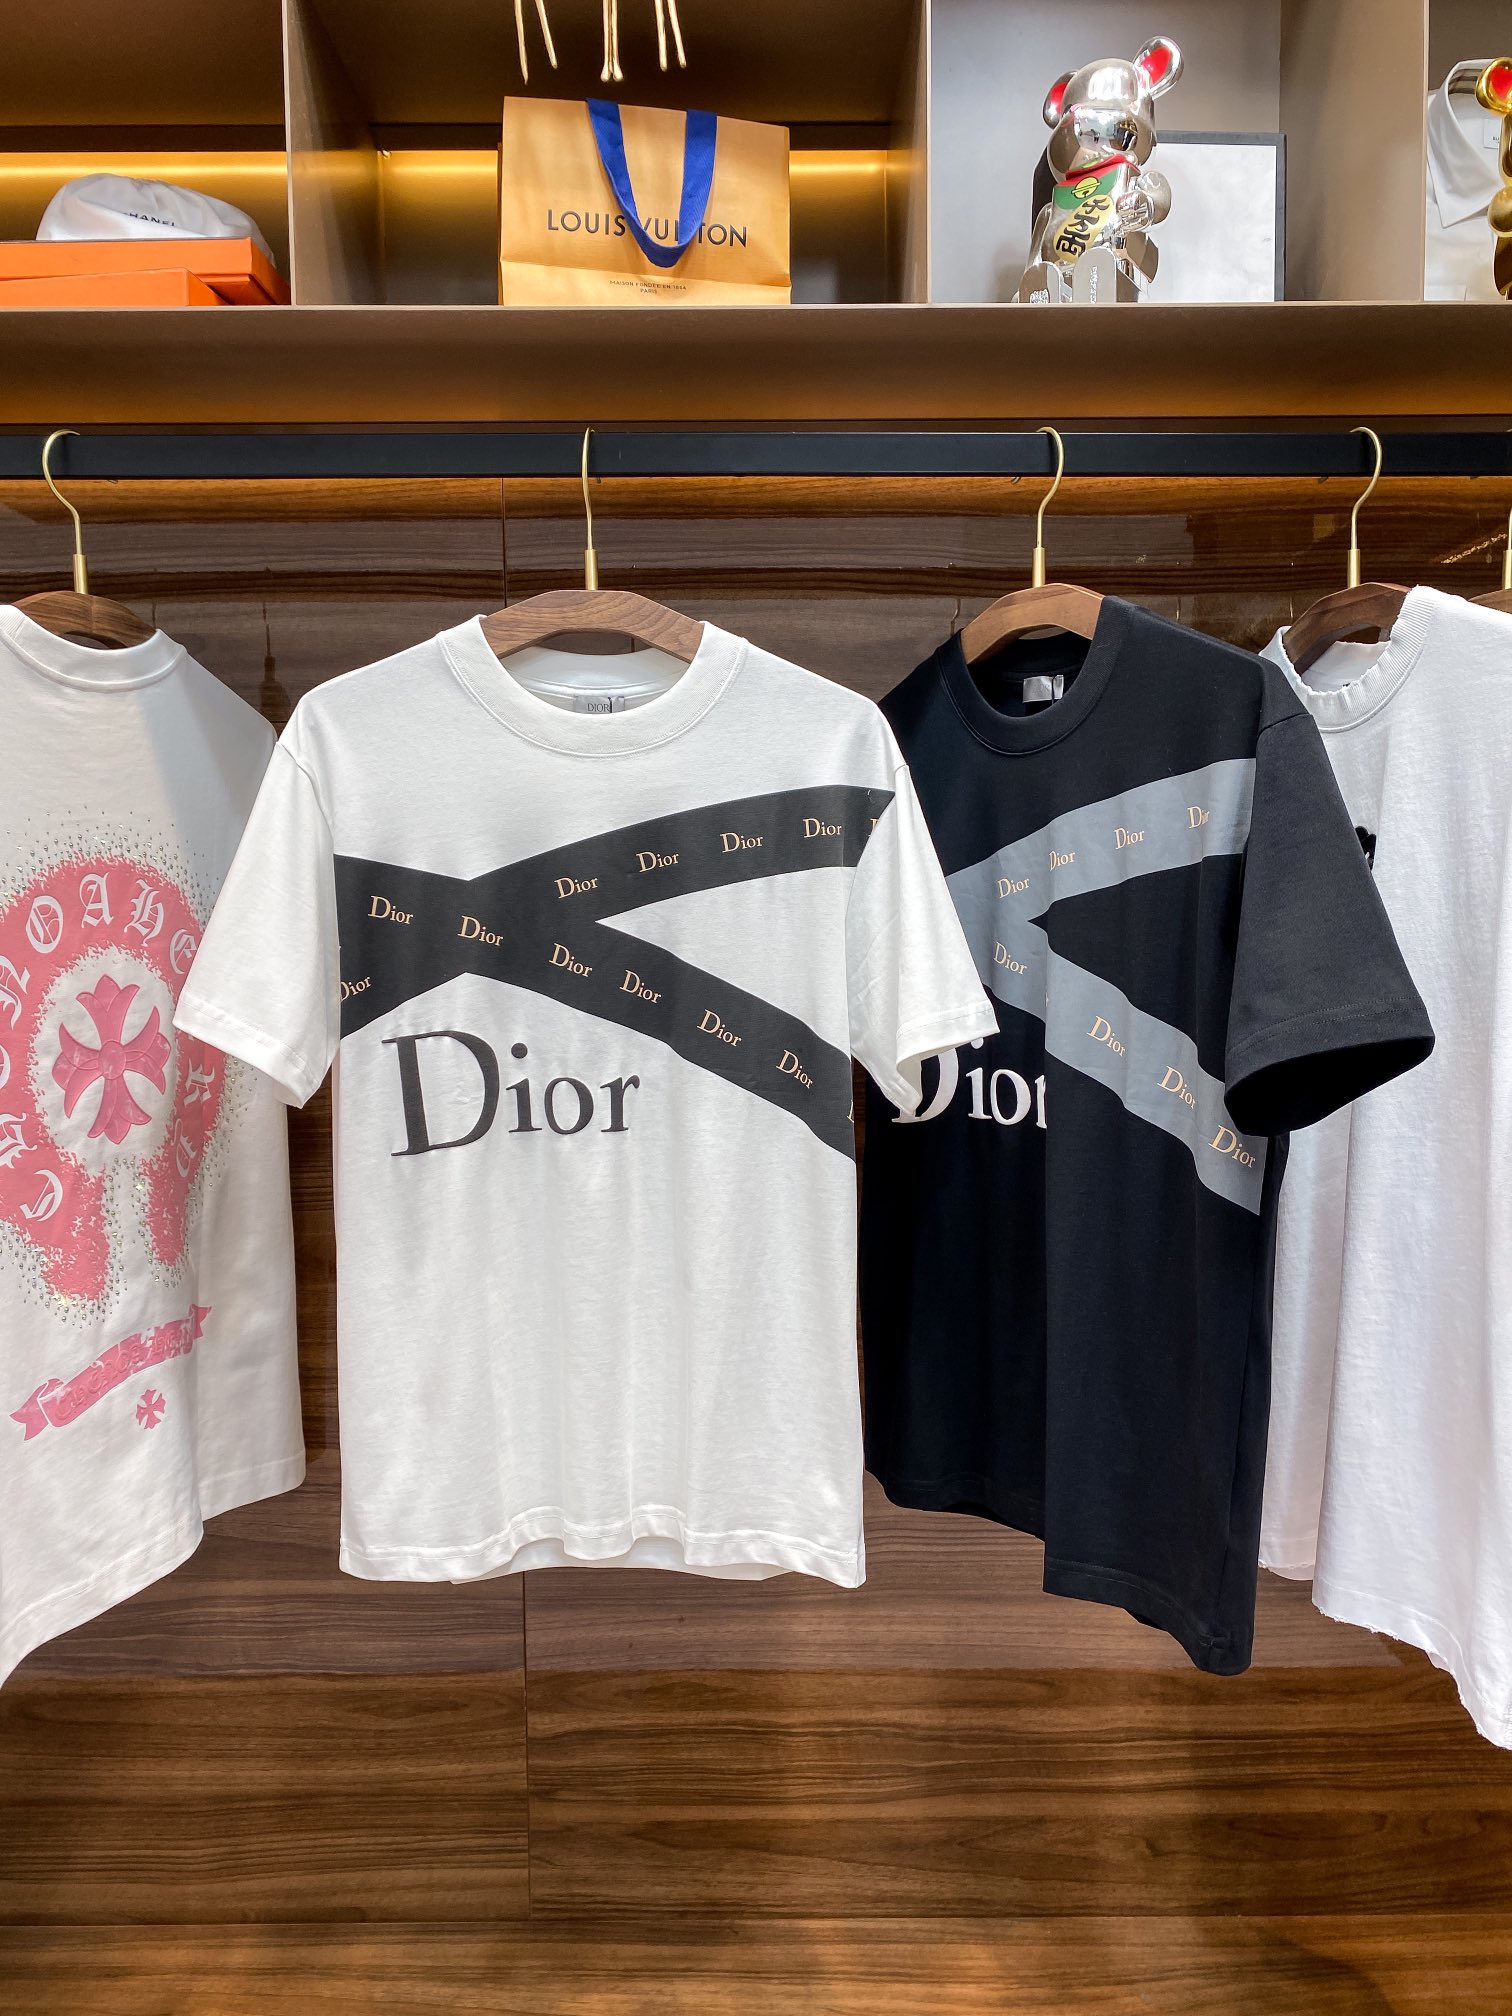 Dior AAA+
 Clothing T-Shirt Black White Printing Unisex Cotton Spring/Summer Collection Fashion Short Sleeve